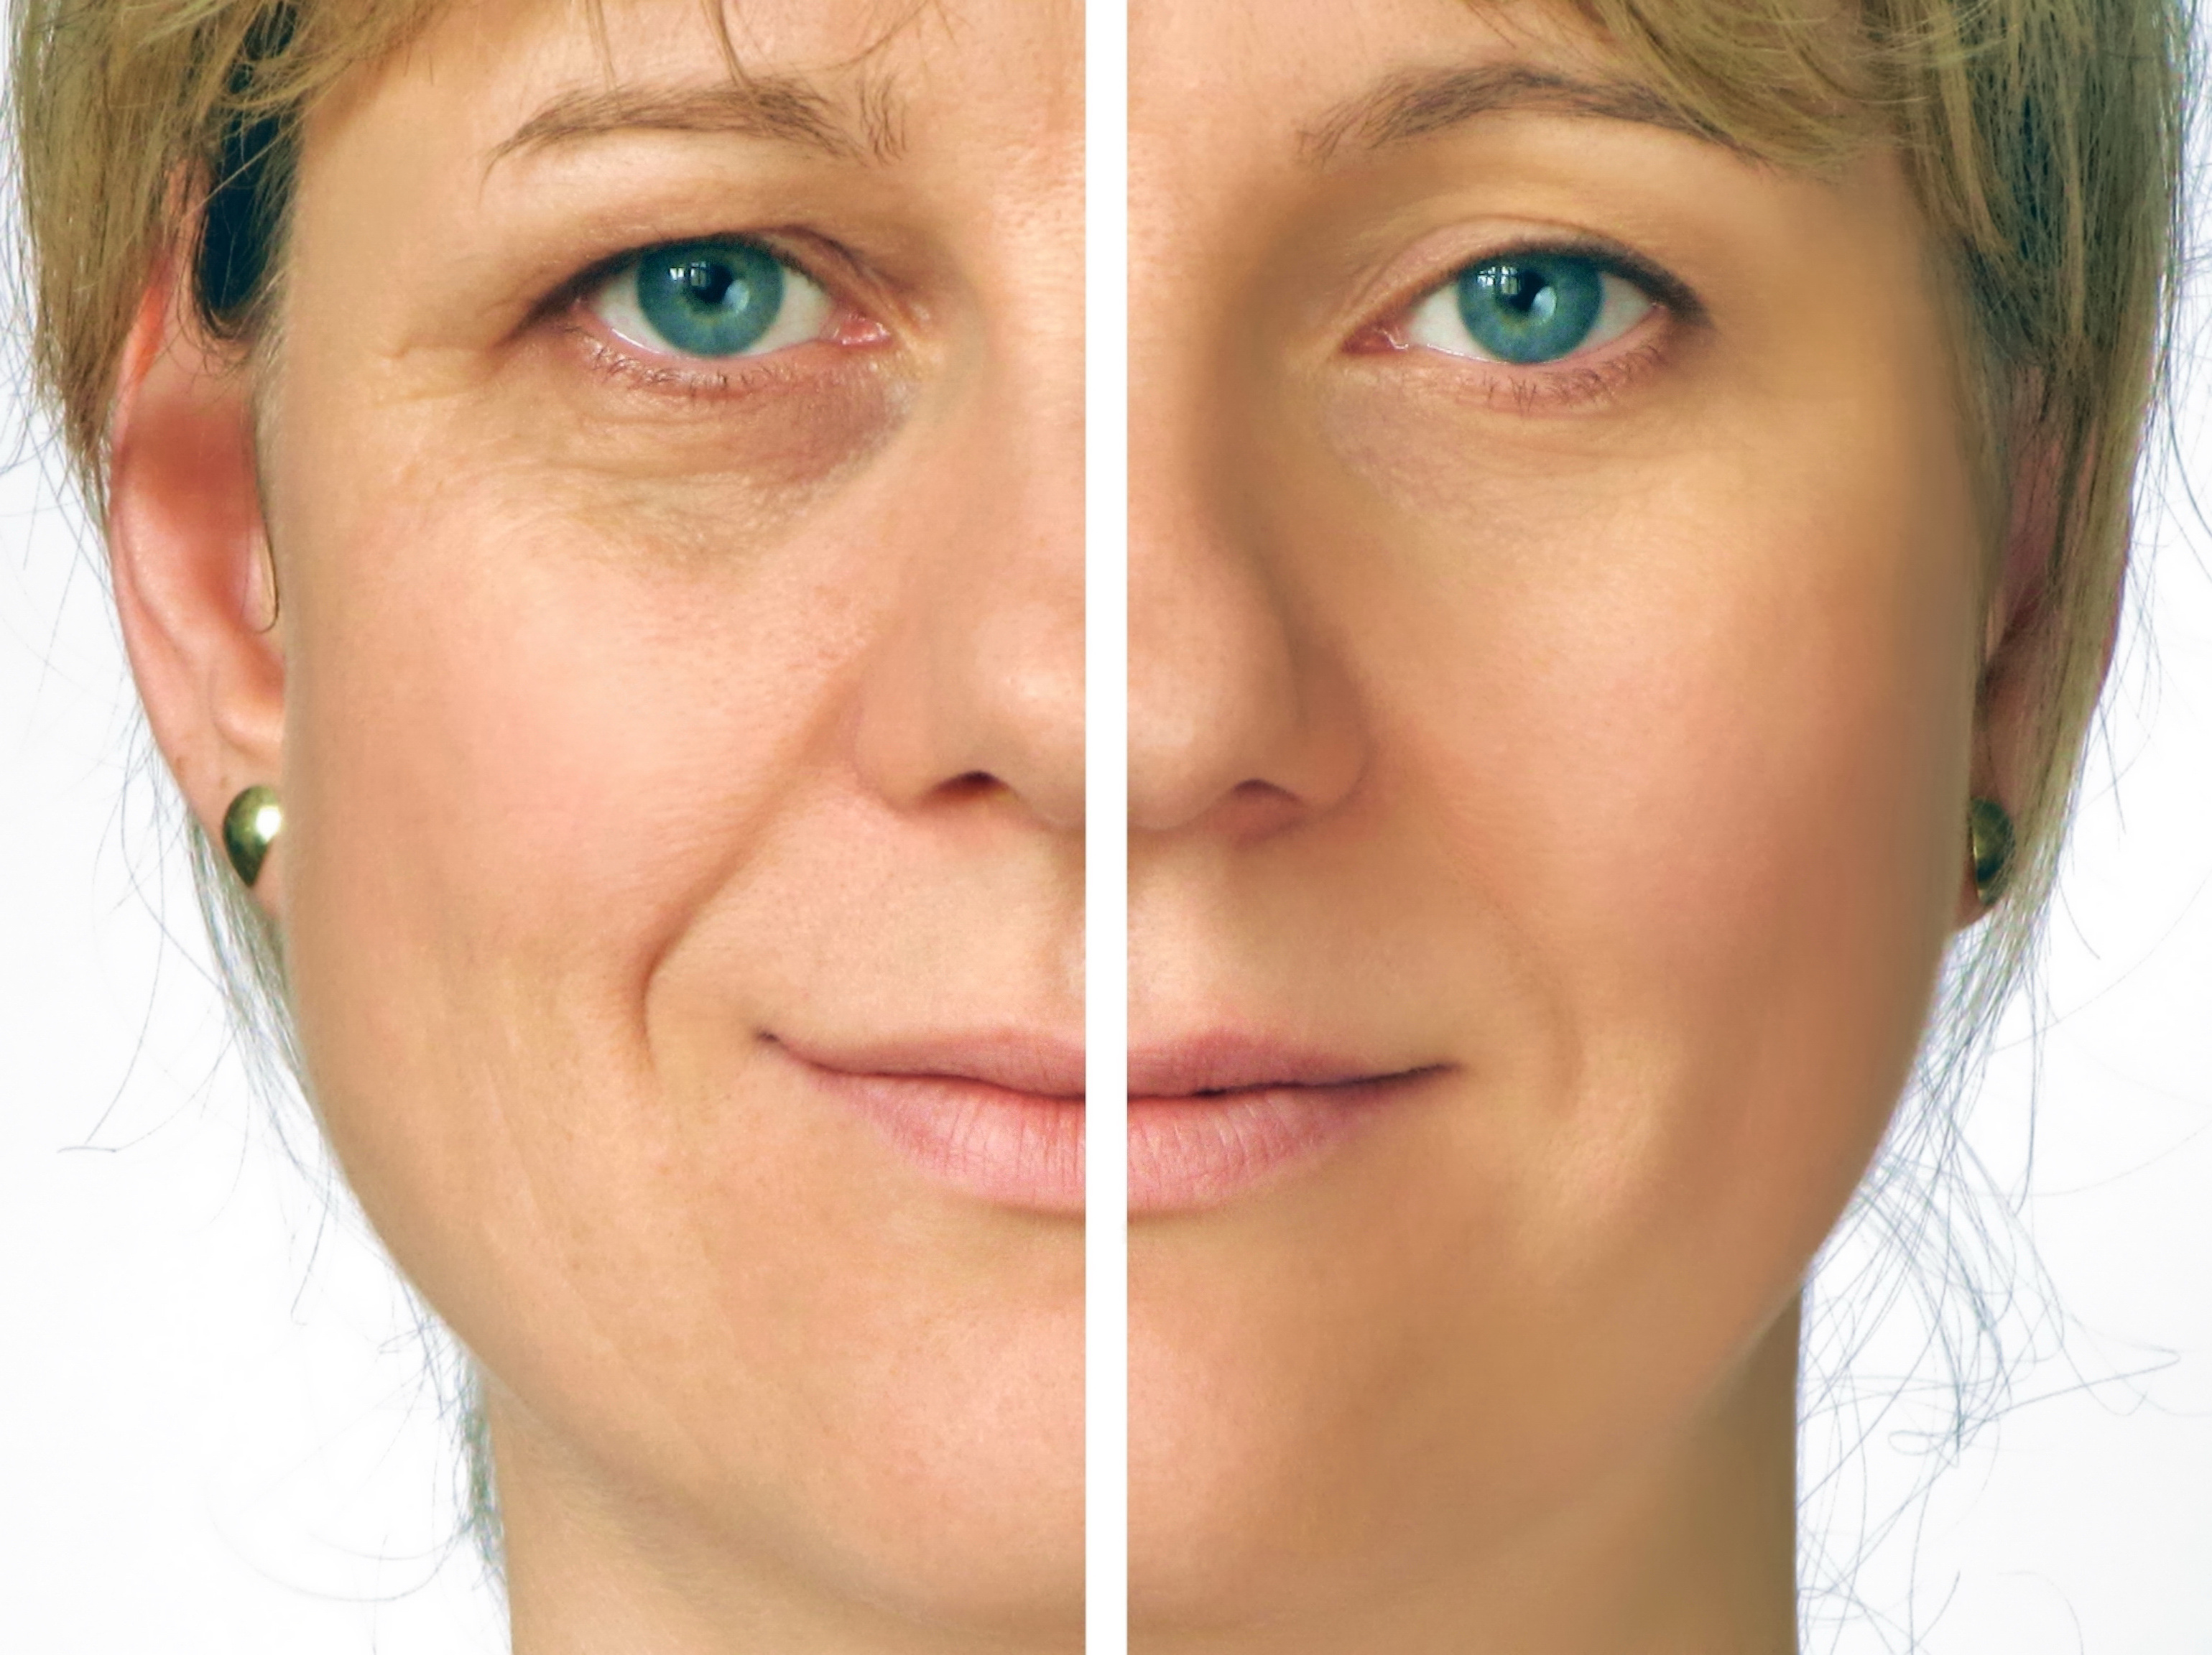 Face Lift - Before and After of Middle Aged Woman's Face Correcting Wrinkles